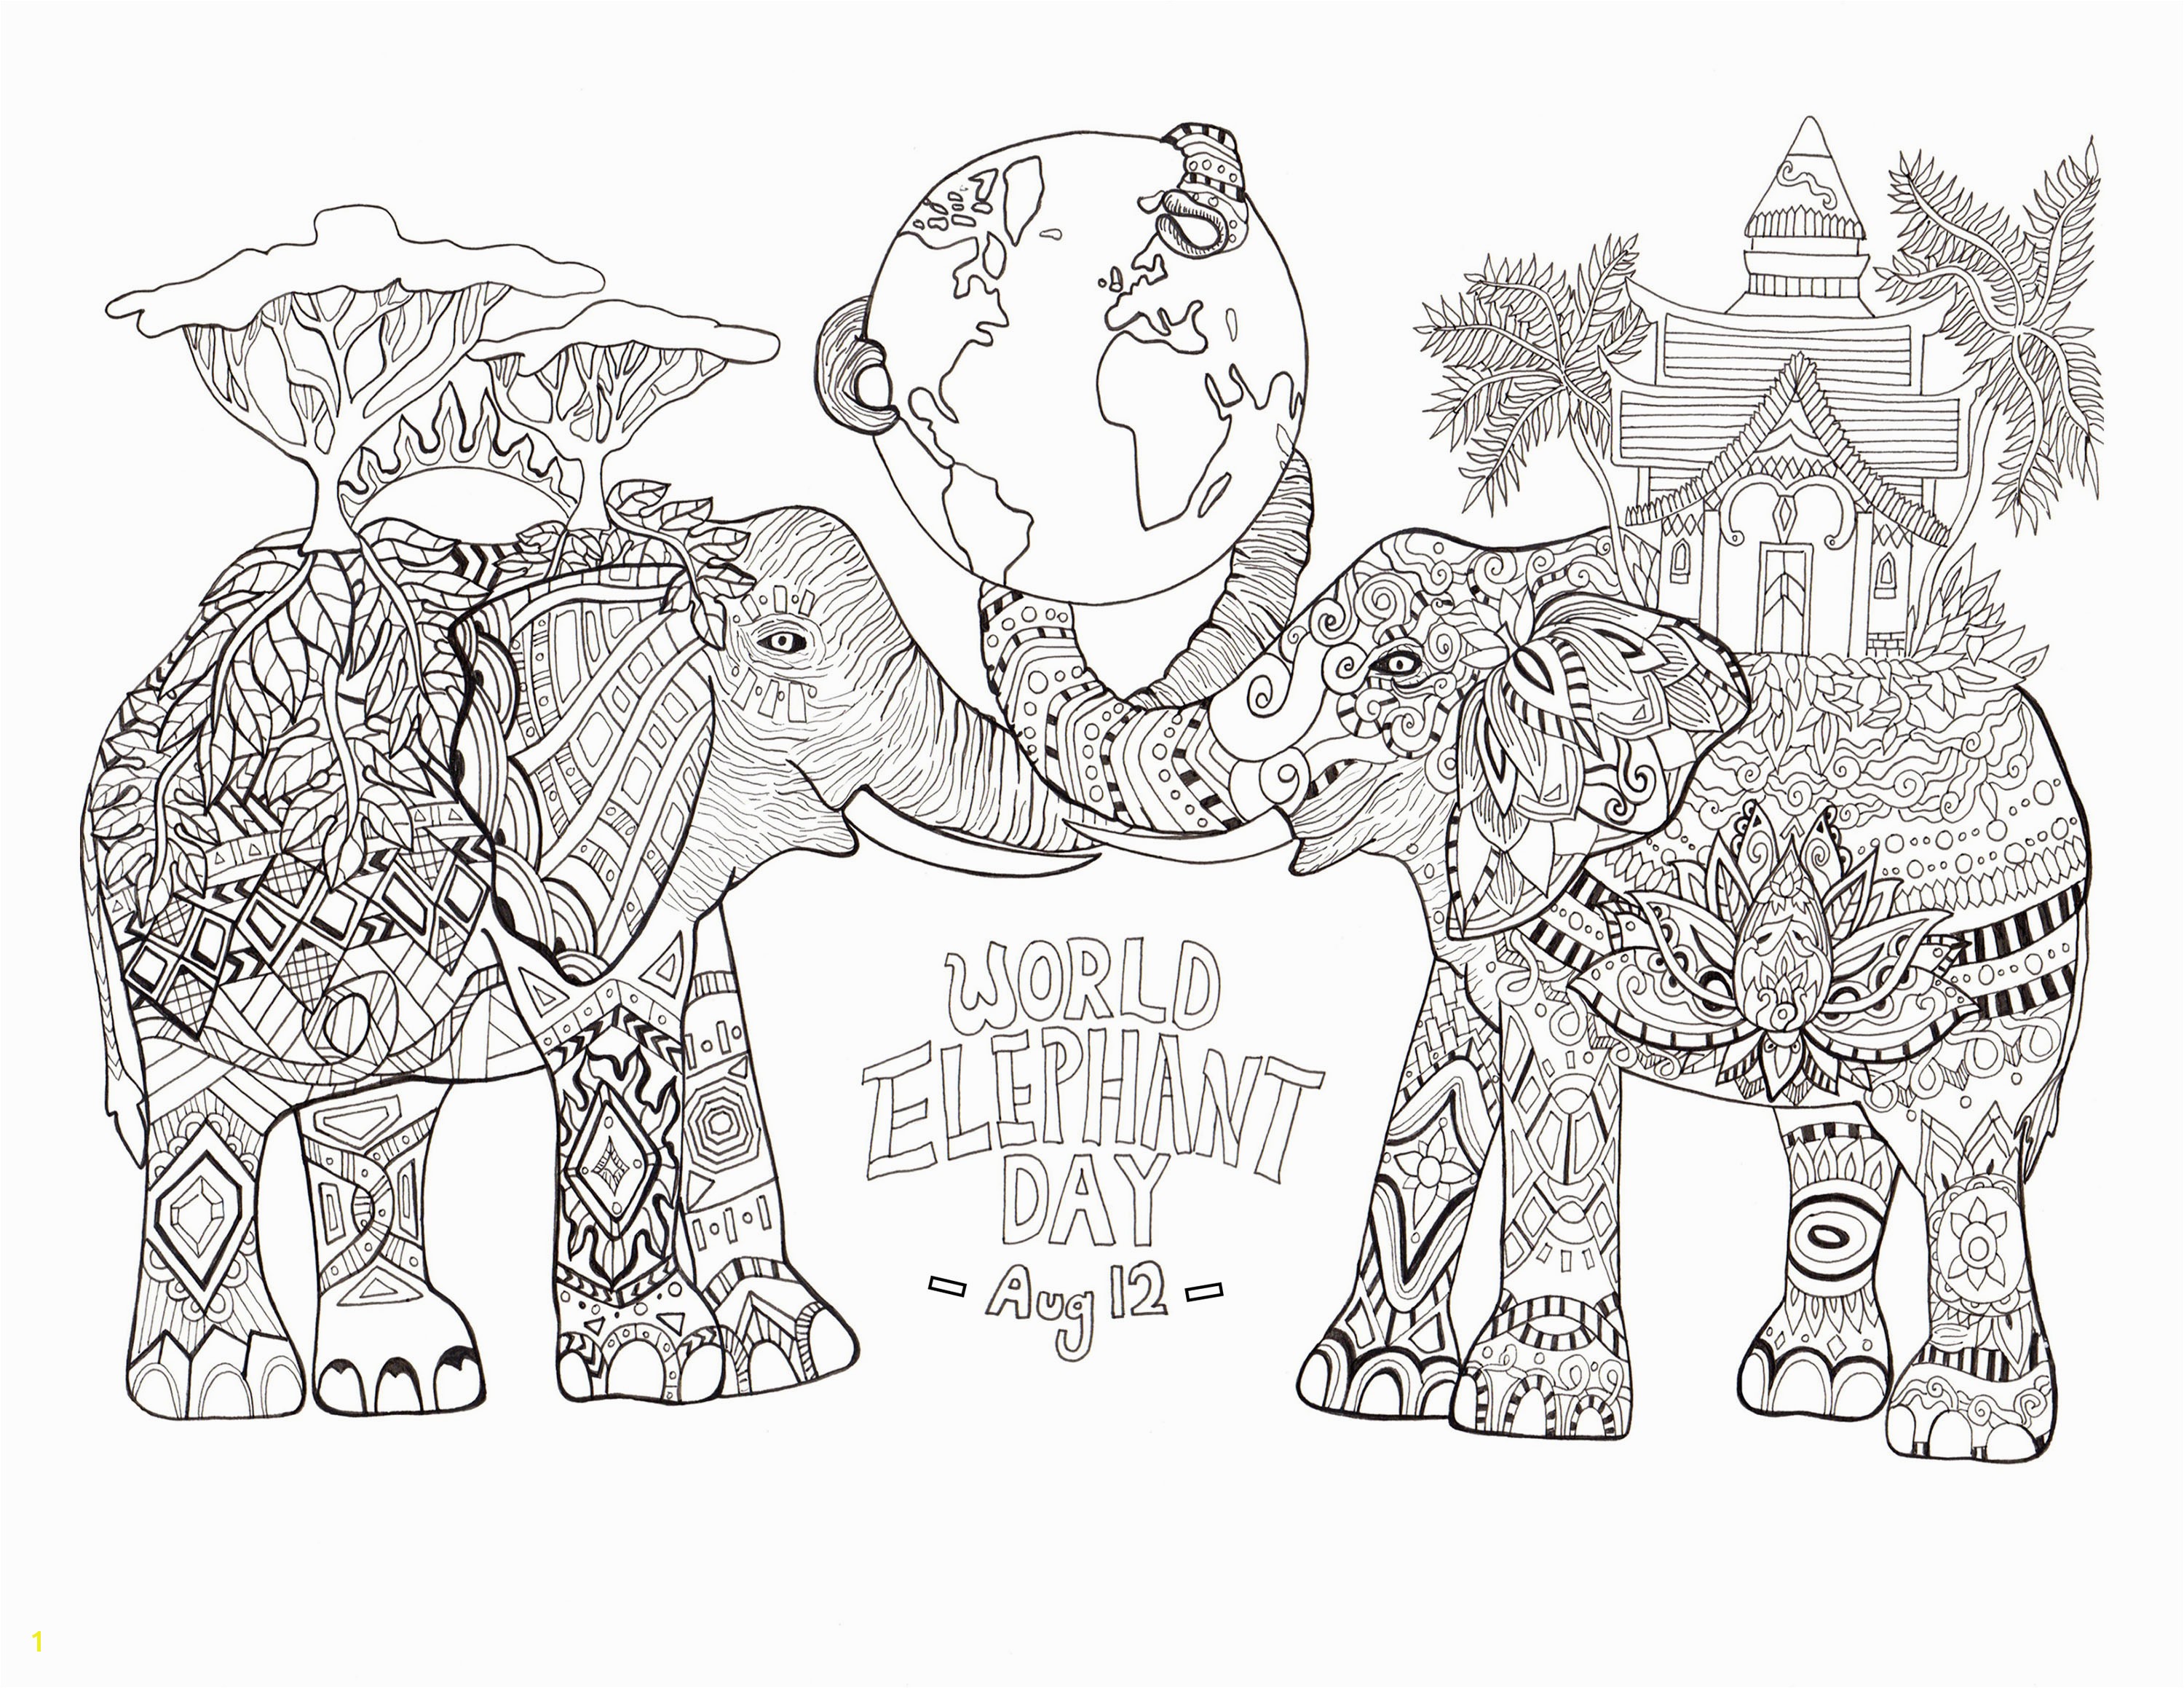 Asian Elephant Coloring Page World Elephant Day Elephants Adult Coloring Pages